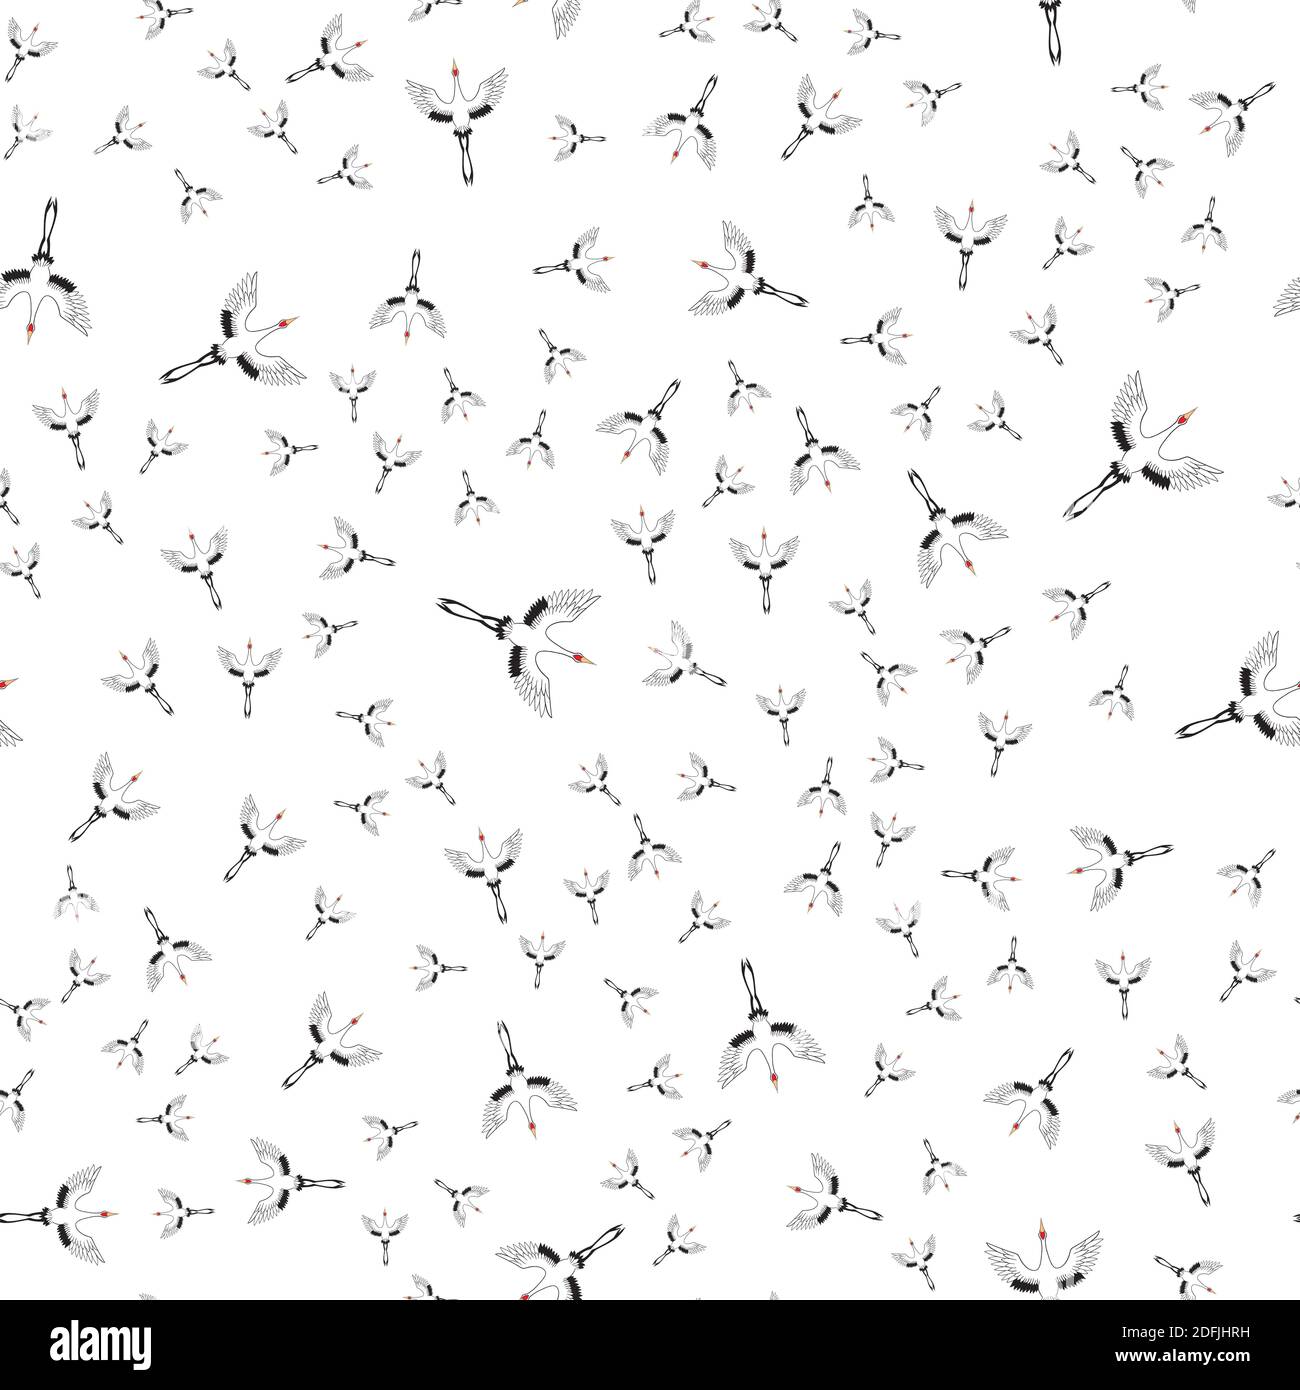 Seamless pattern with Japanese white cranes. Stock Vector